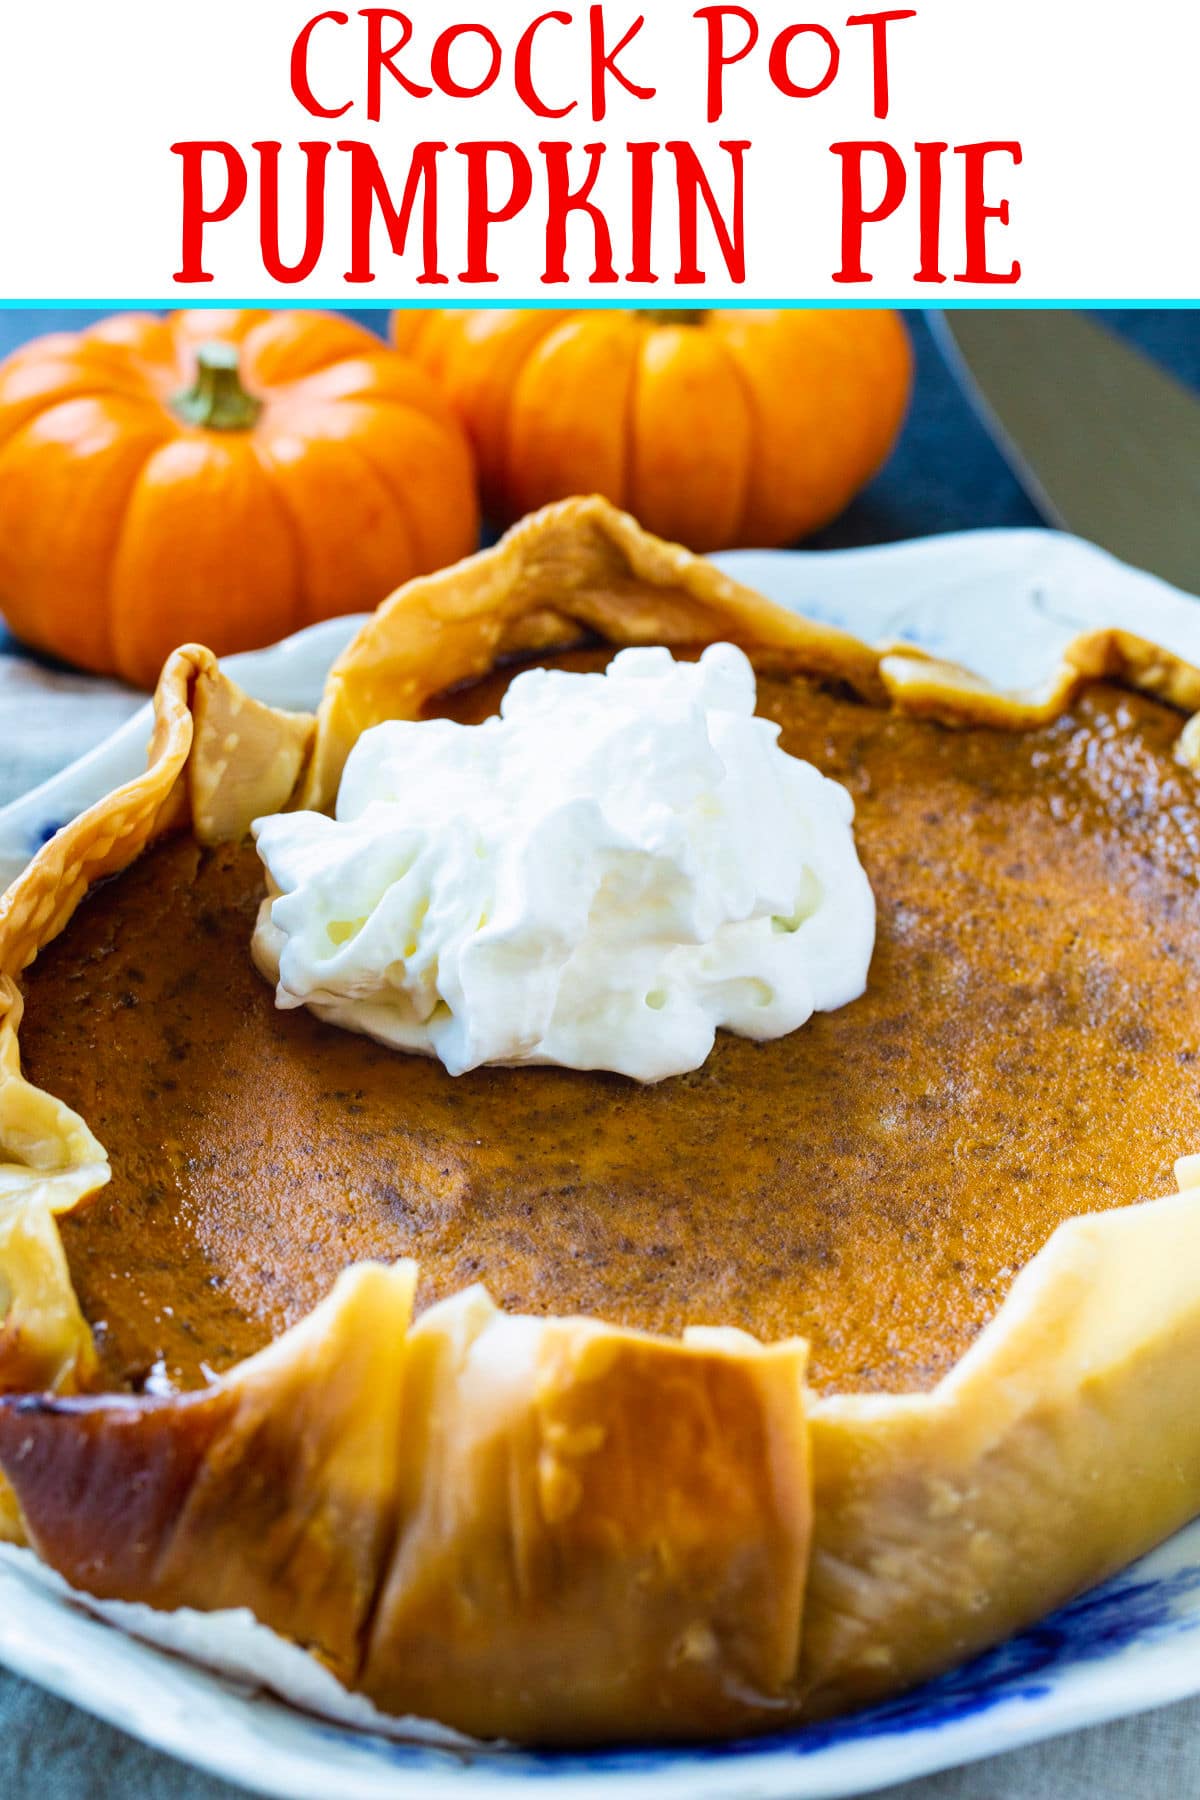 Crock Pot Pumpkin Pie topped with whipped cream.